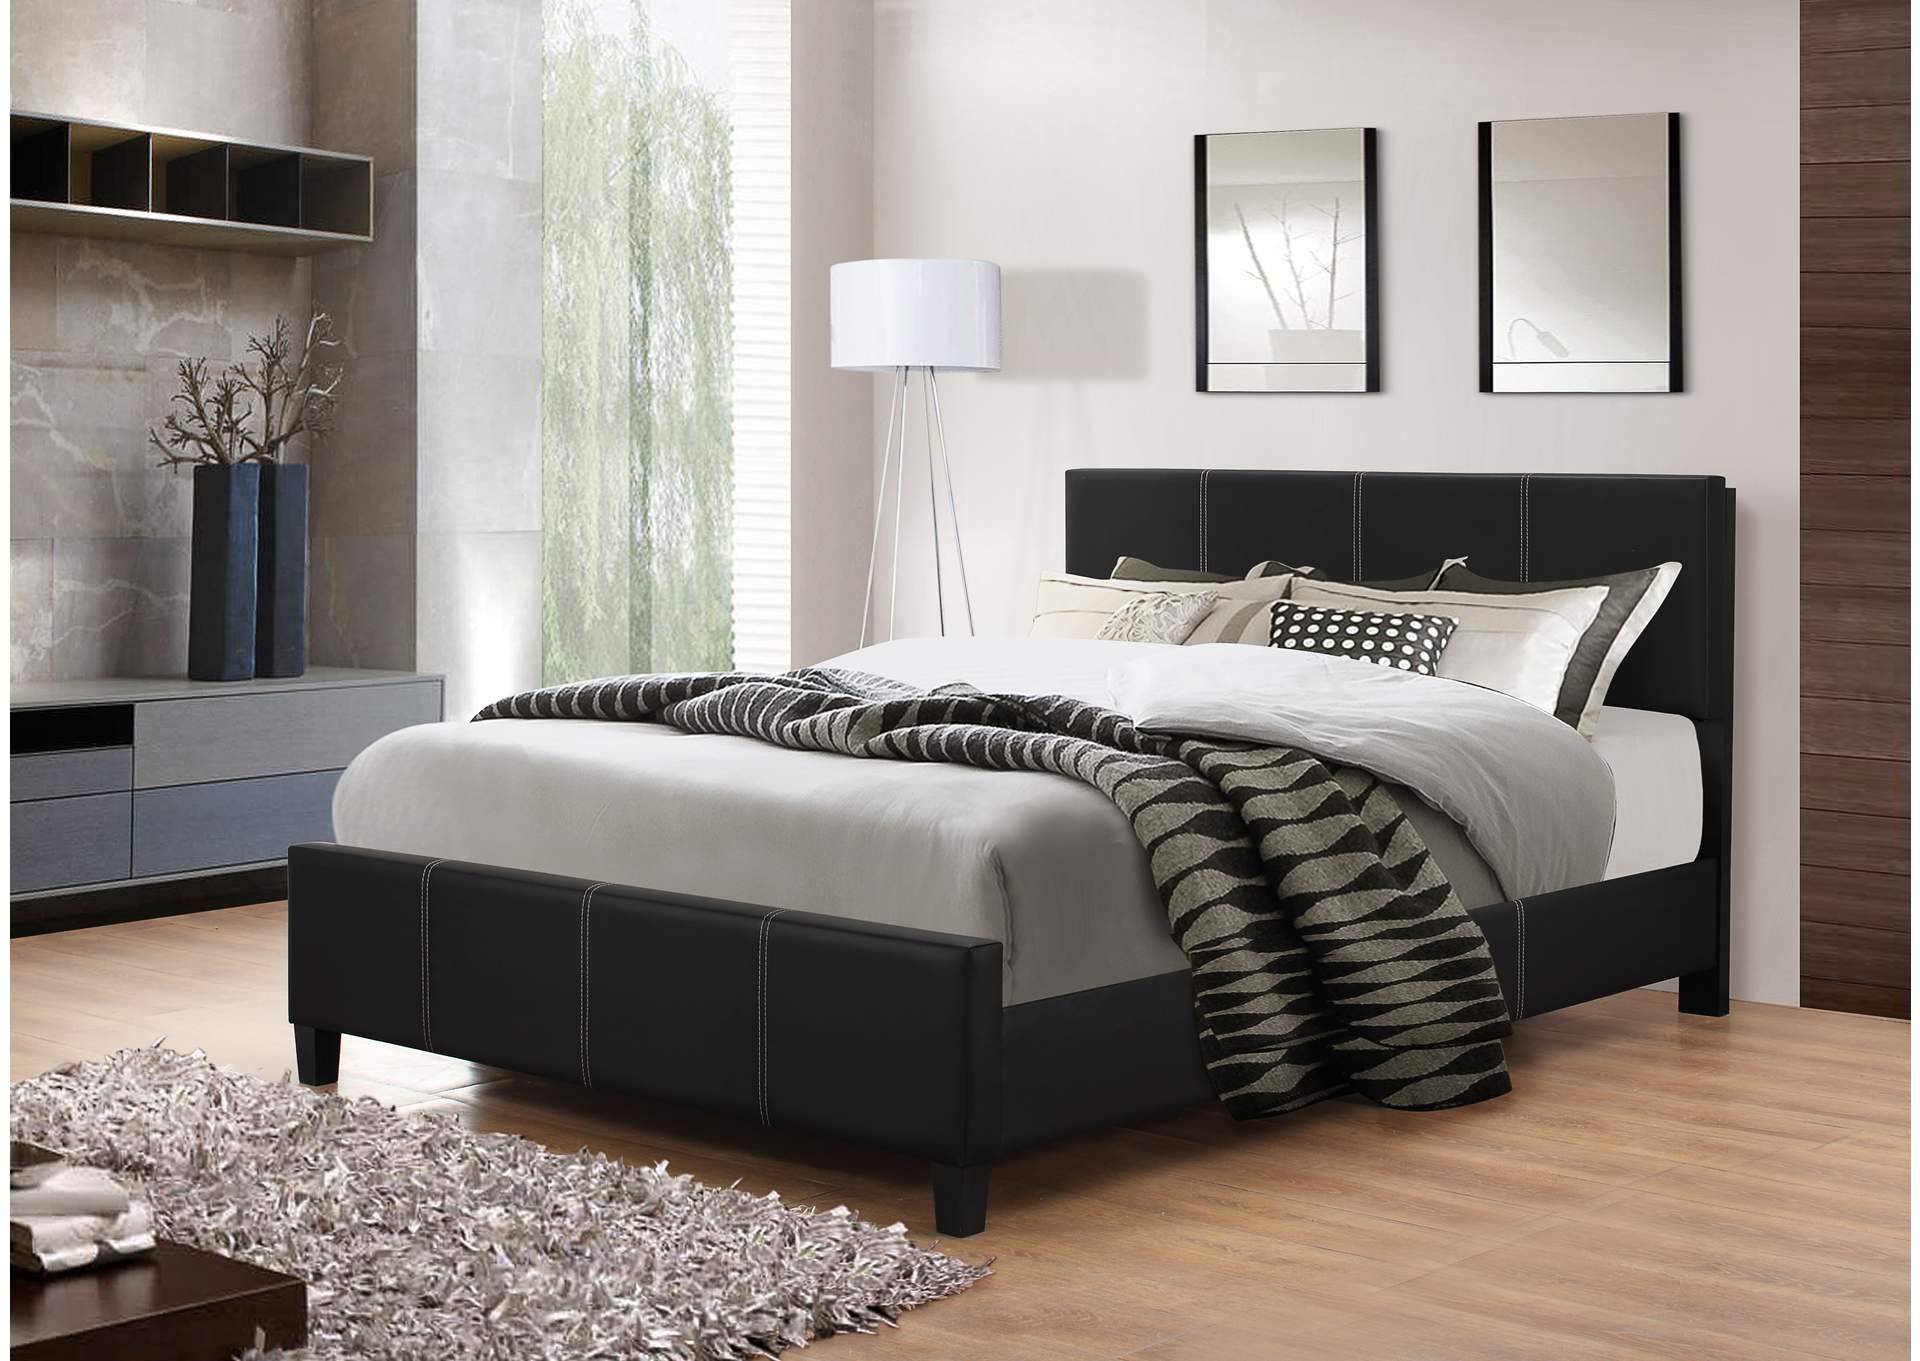 Harlynx Black Queen Bed,Global Trading